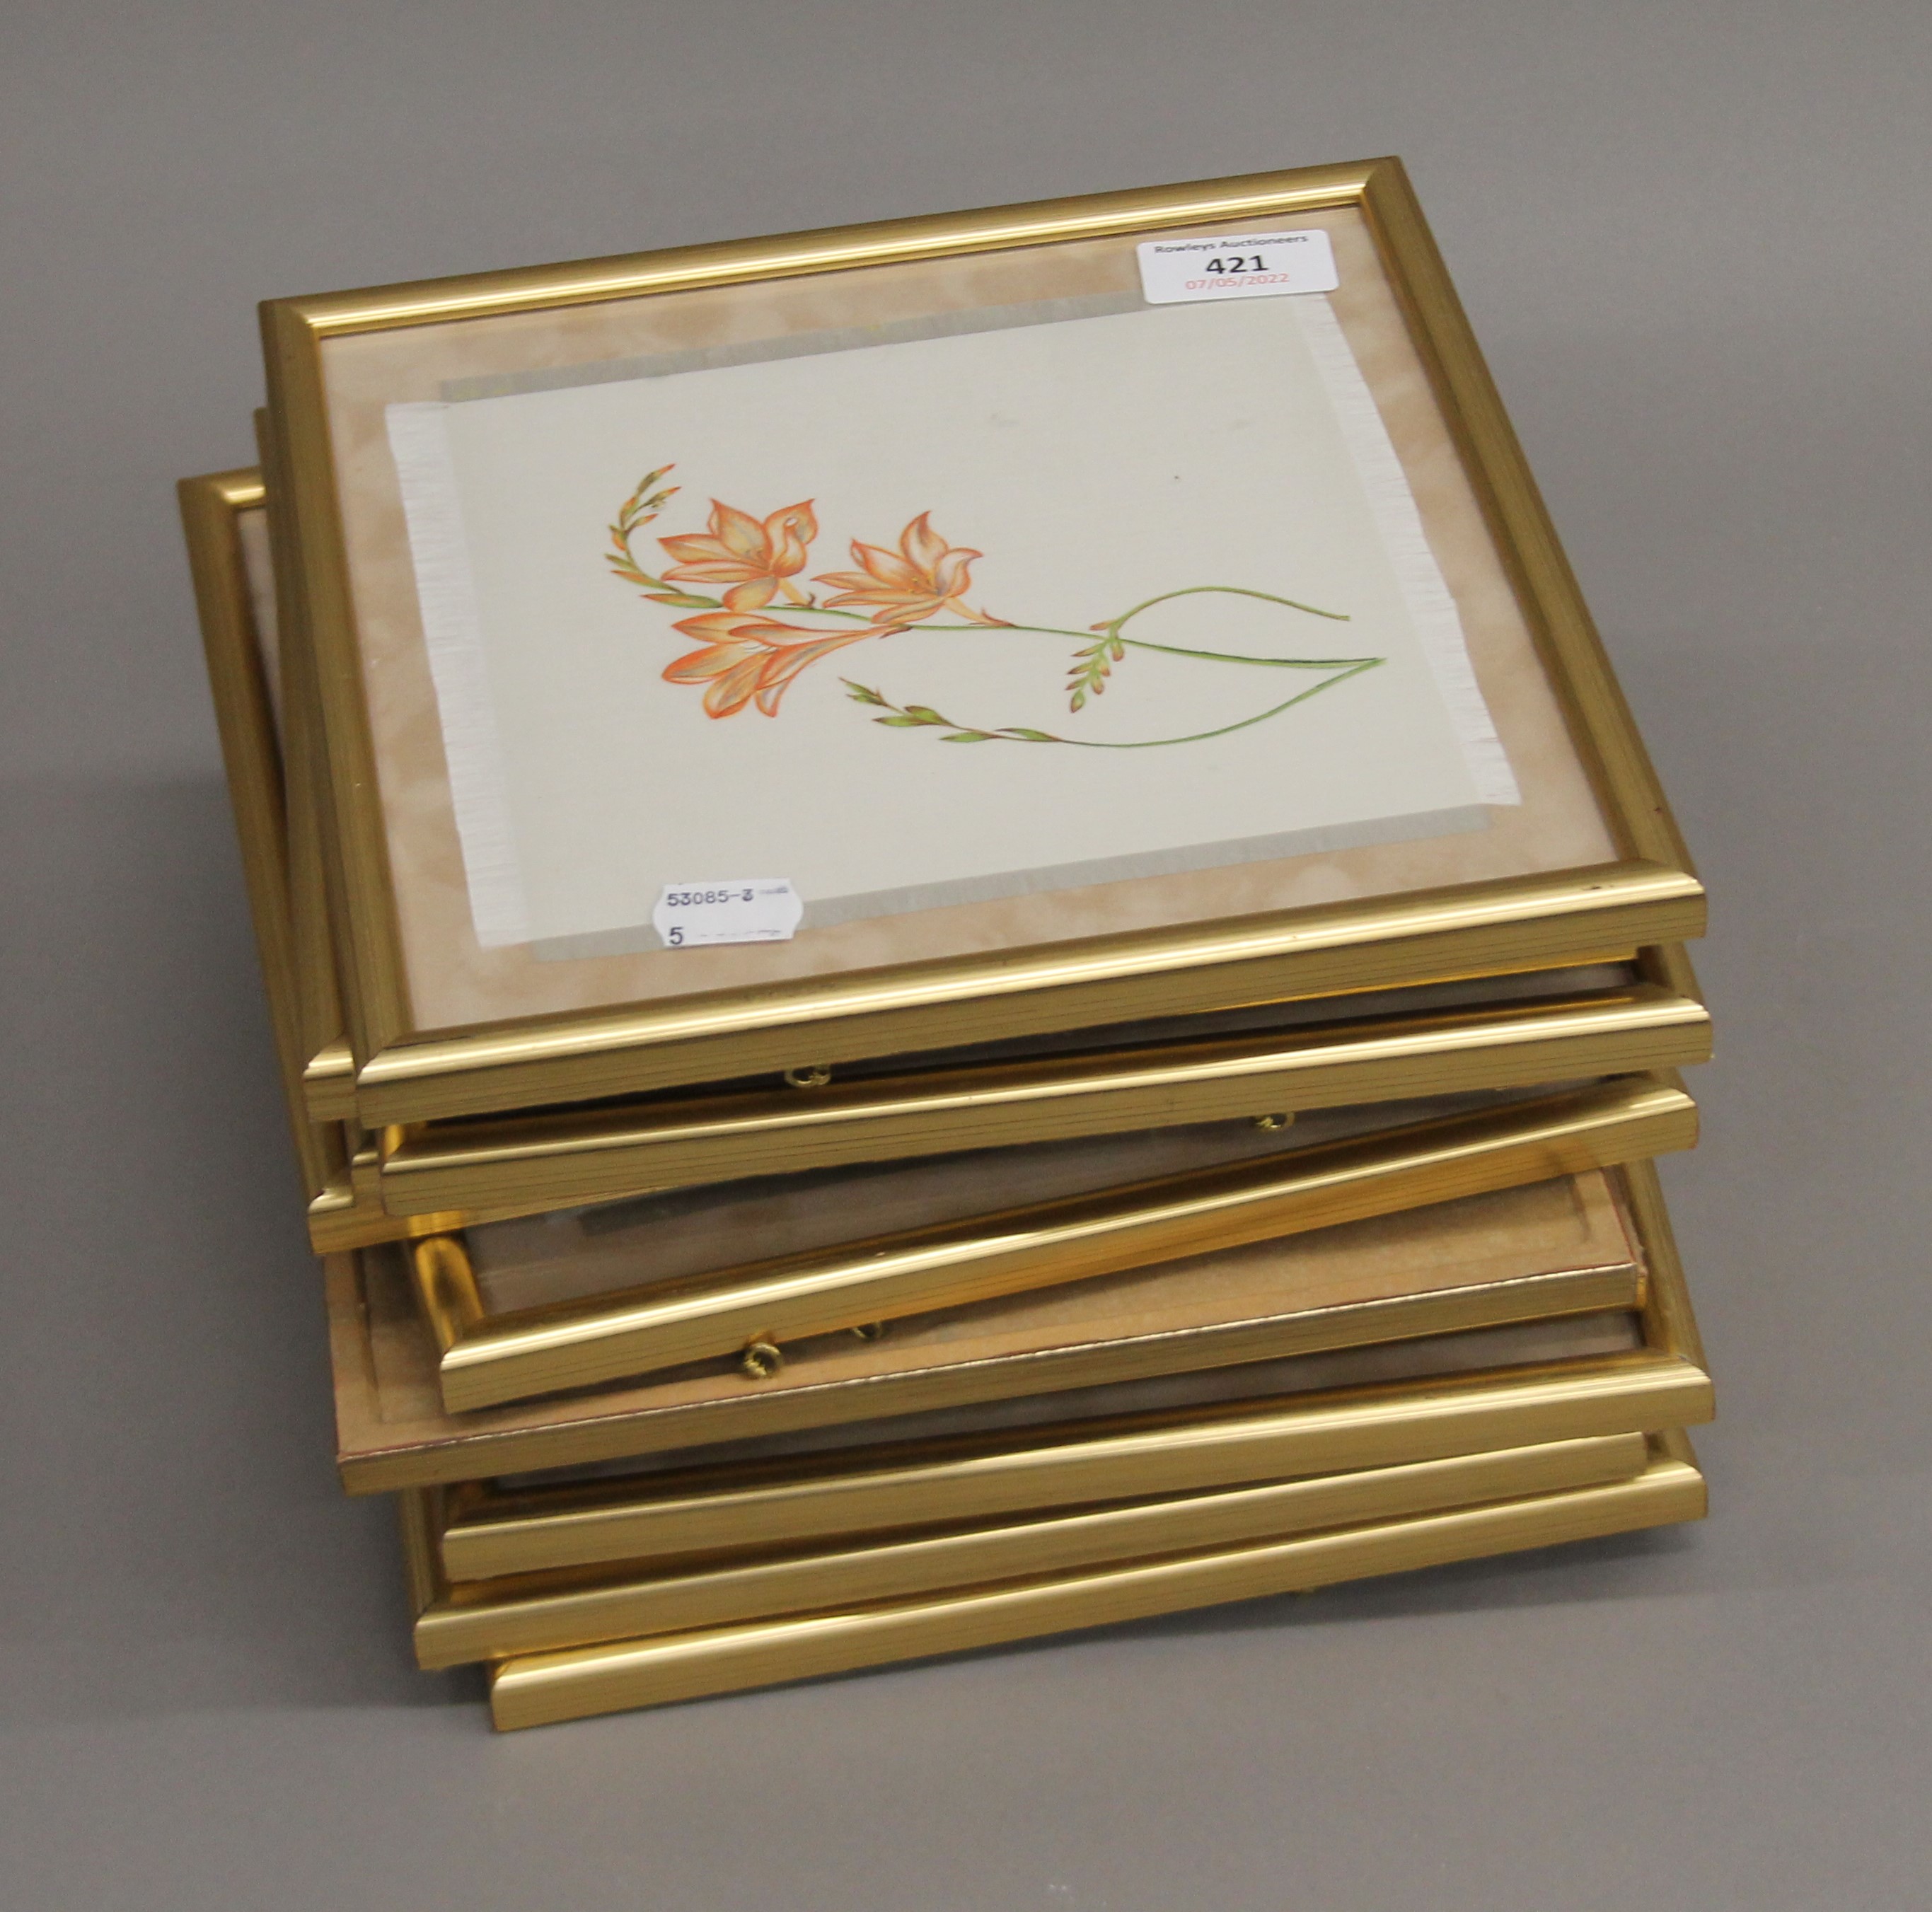 Twelve floral paintings on silk, each framed and glazed. 23 cm squared overall.